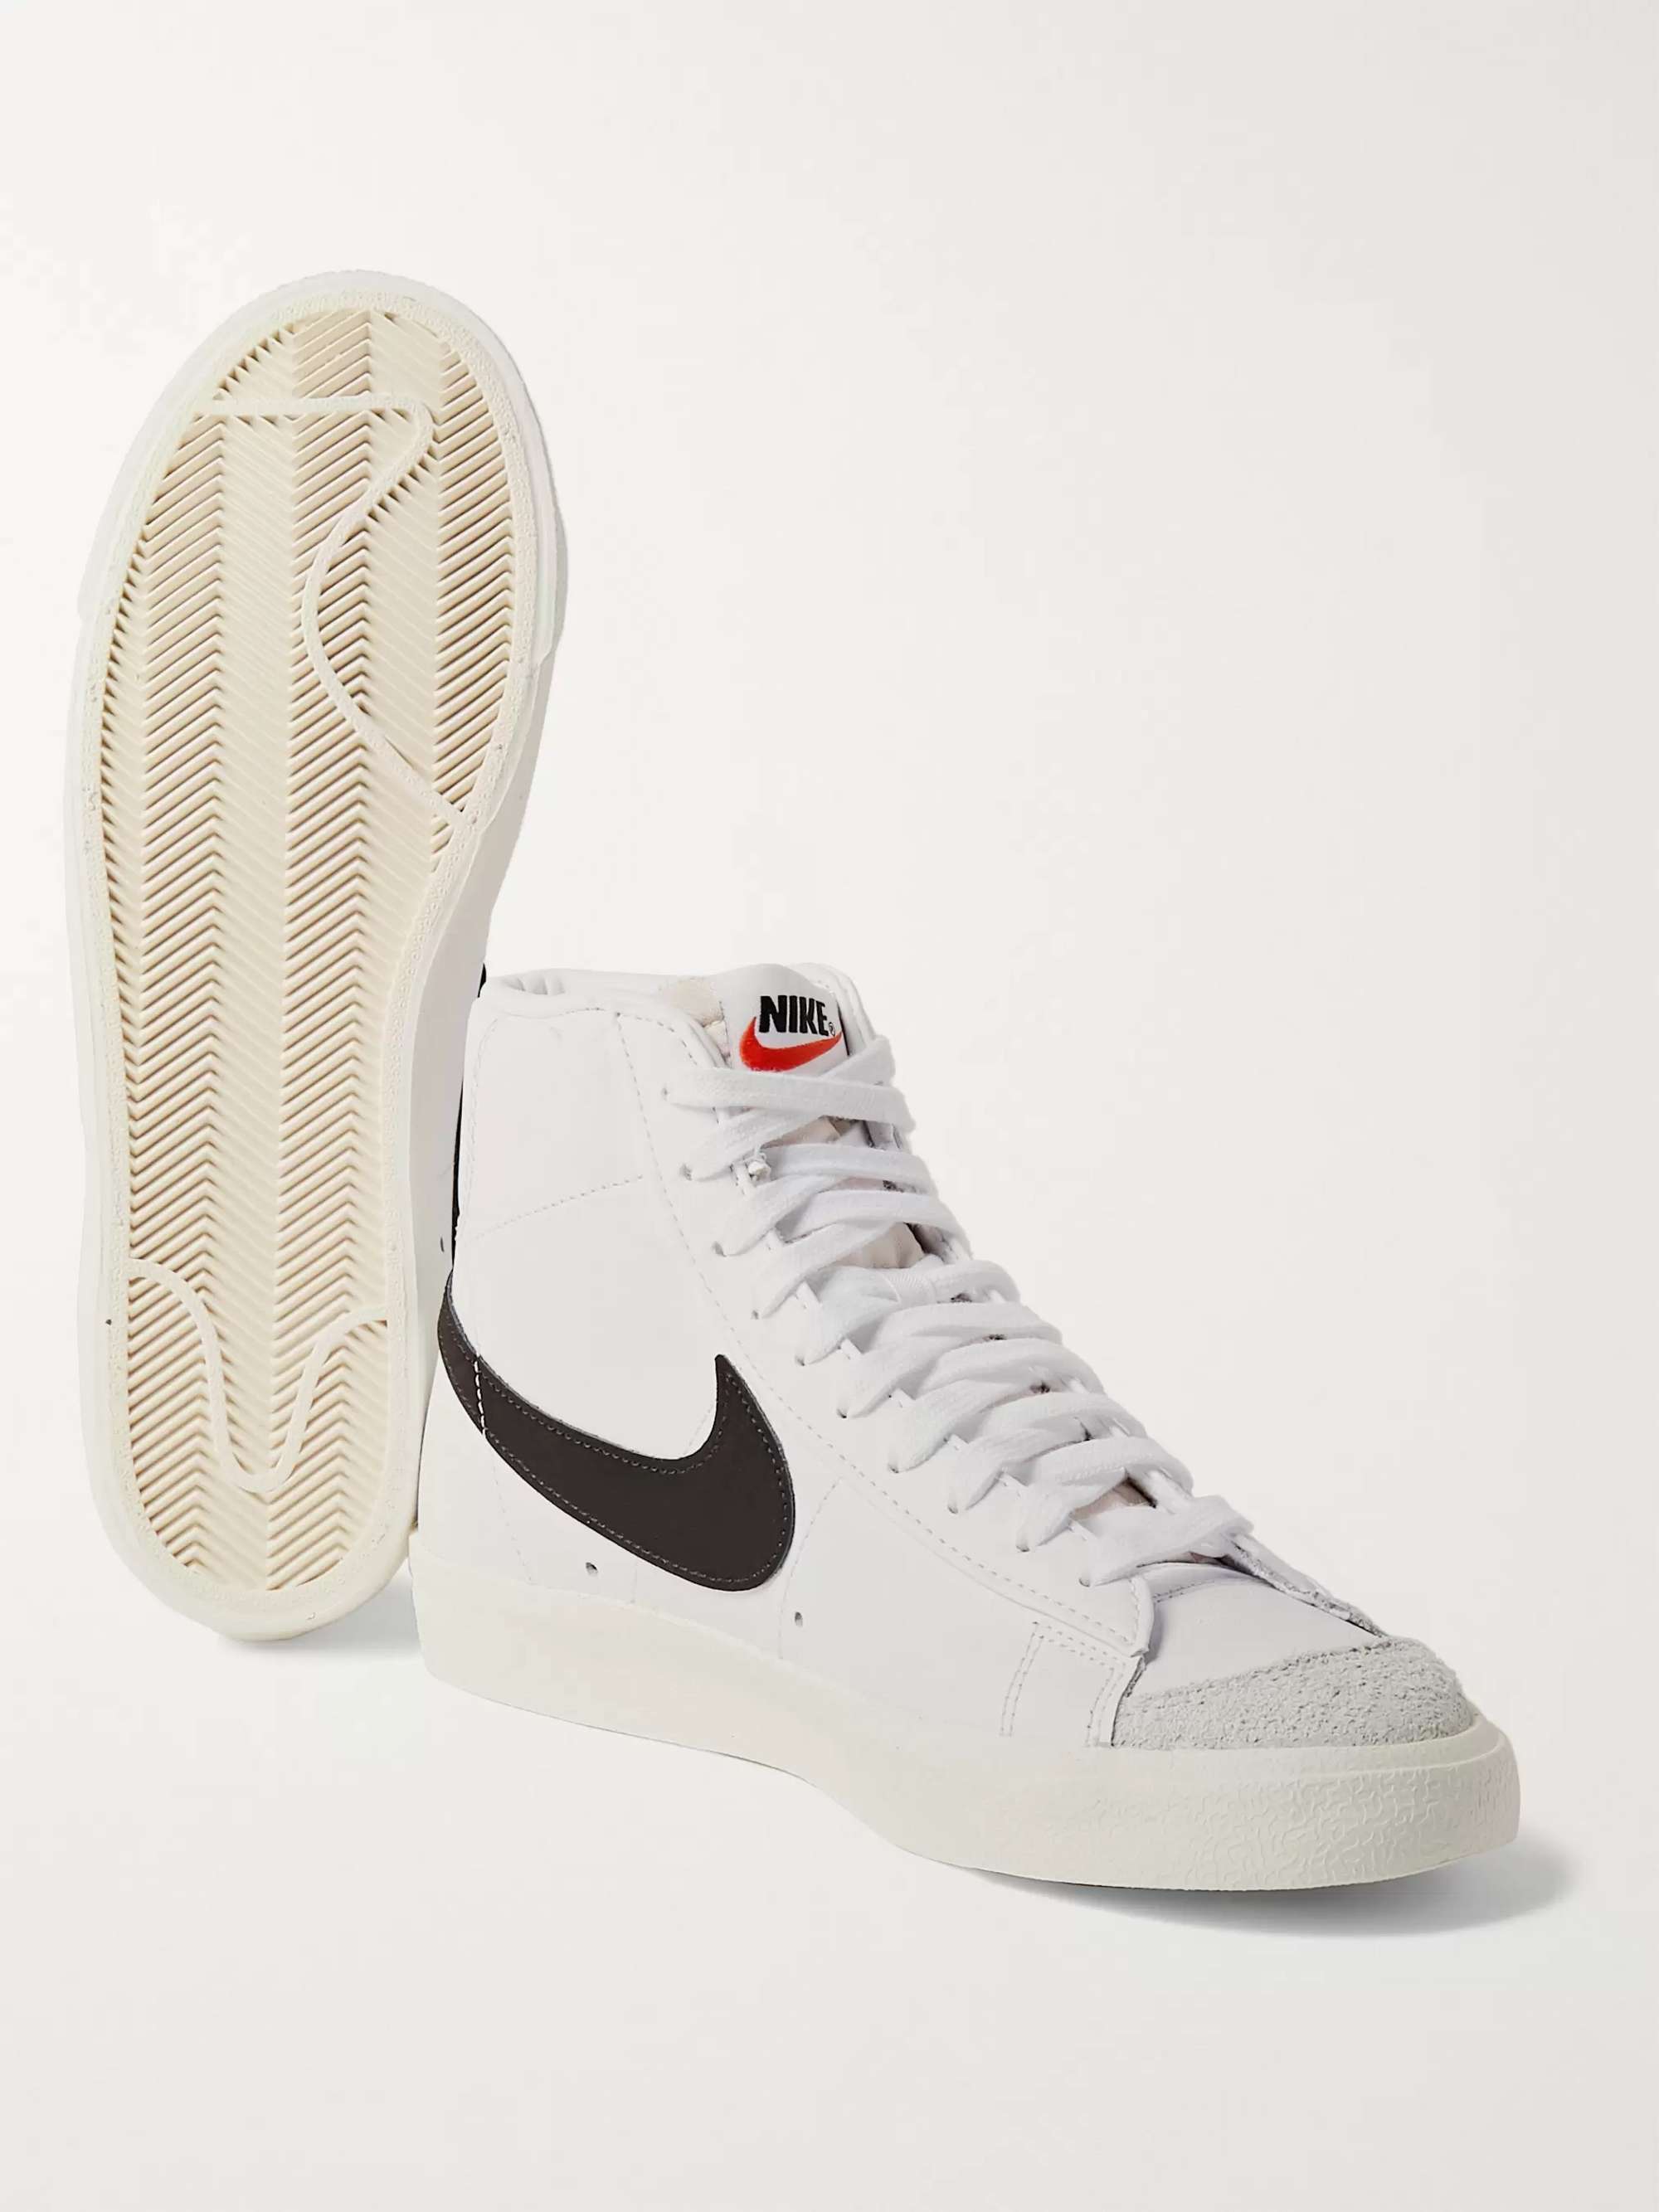 NIKE Blazer Mid '77 Suede-Trimmed Leather Sneakers | MR PORTER